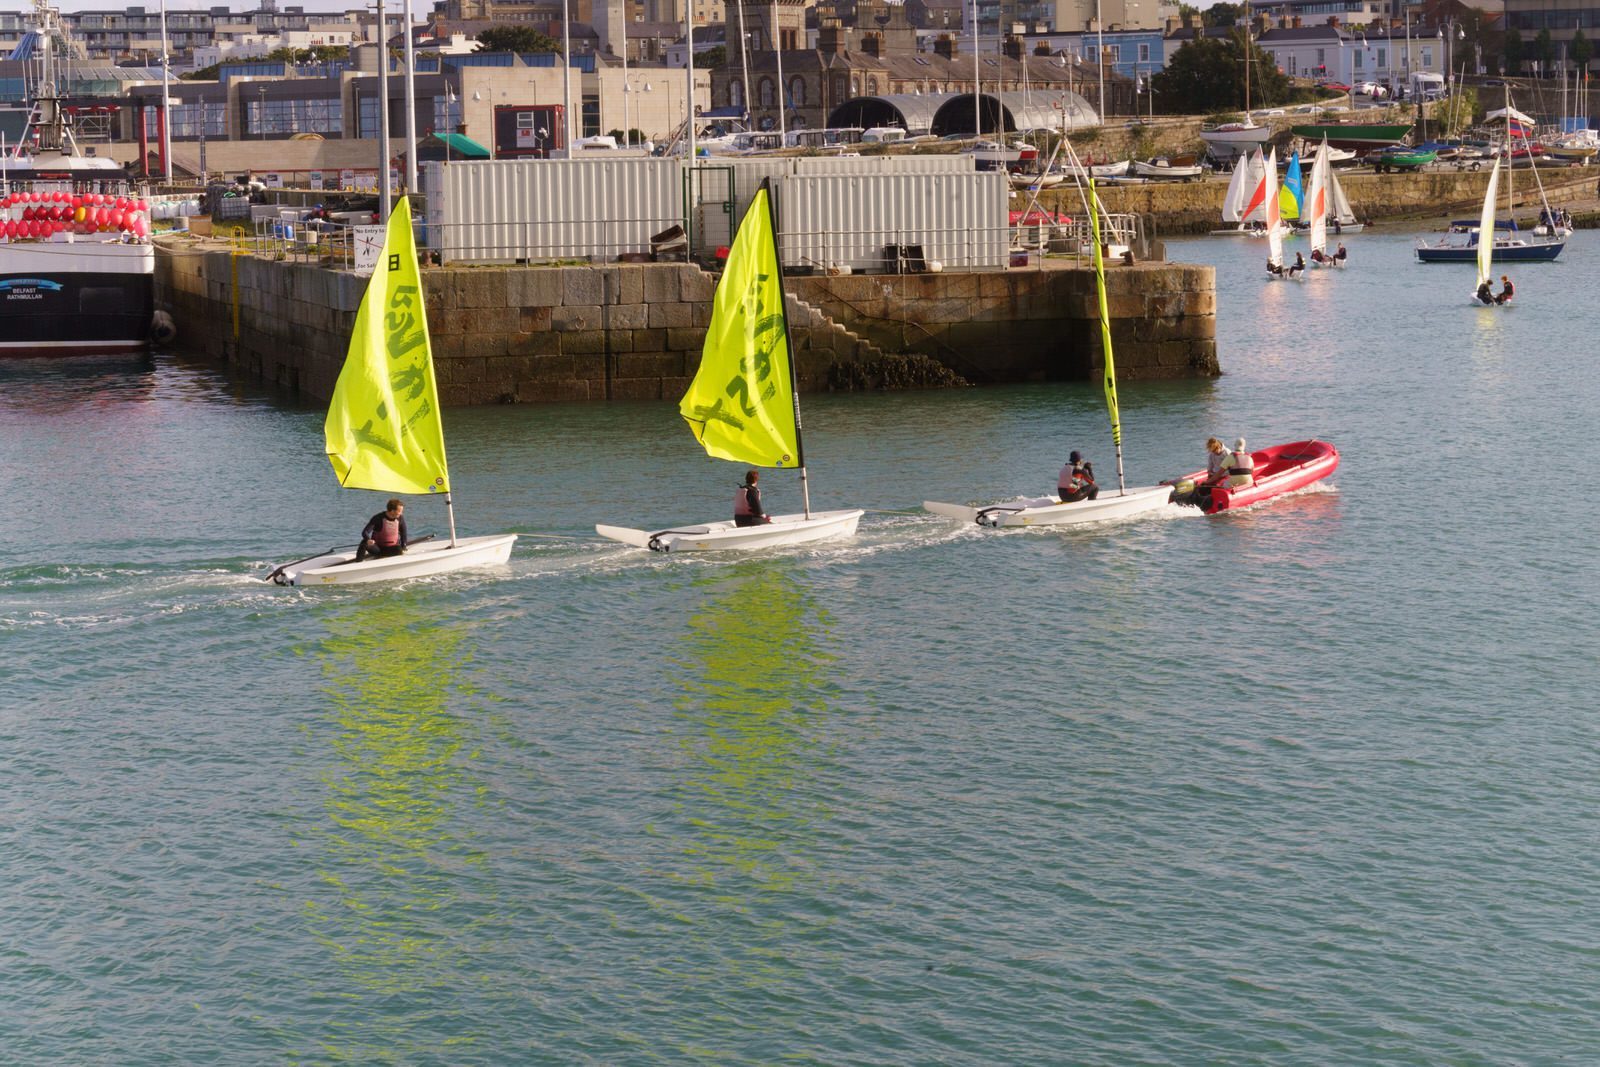 learning to sail, west pier, Dun Laoghaire,Irish National Sailing & Powerboat School,scenic venue,many amenities,Ireland, William Murphy, Sony, A7RIV, 70-20mm lens, 003